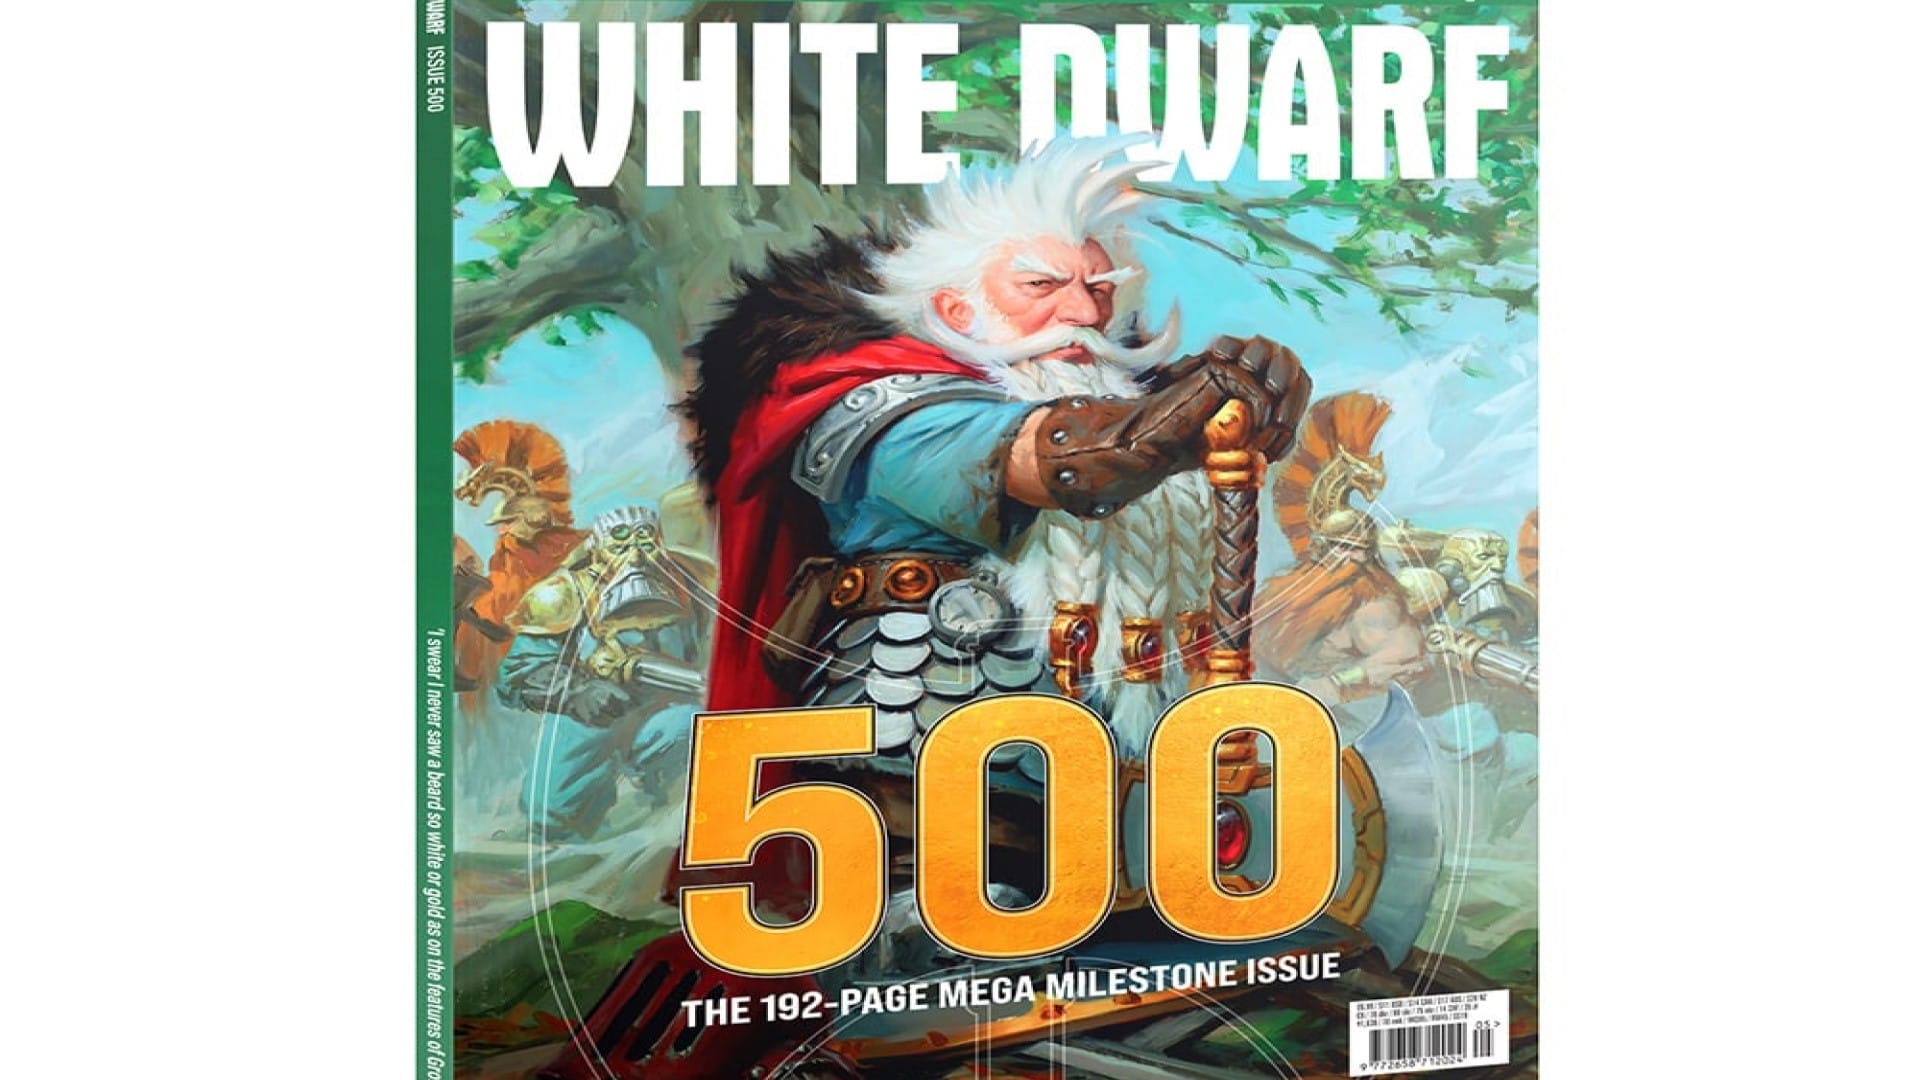 A screenshot of the cover for White Dwarf #500, showing the dwarf Grombrindal standing majestically with his axe planted in front of him.